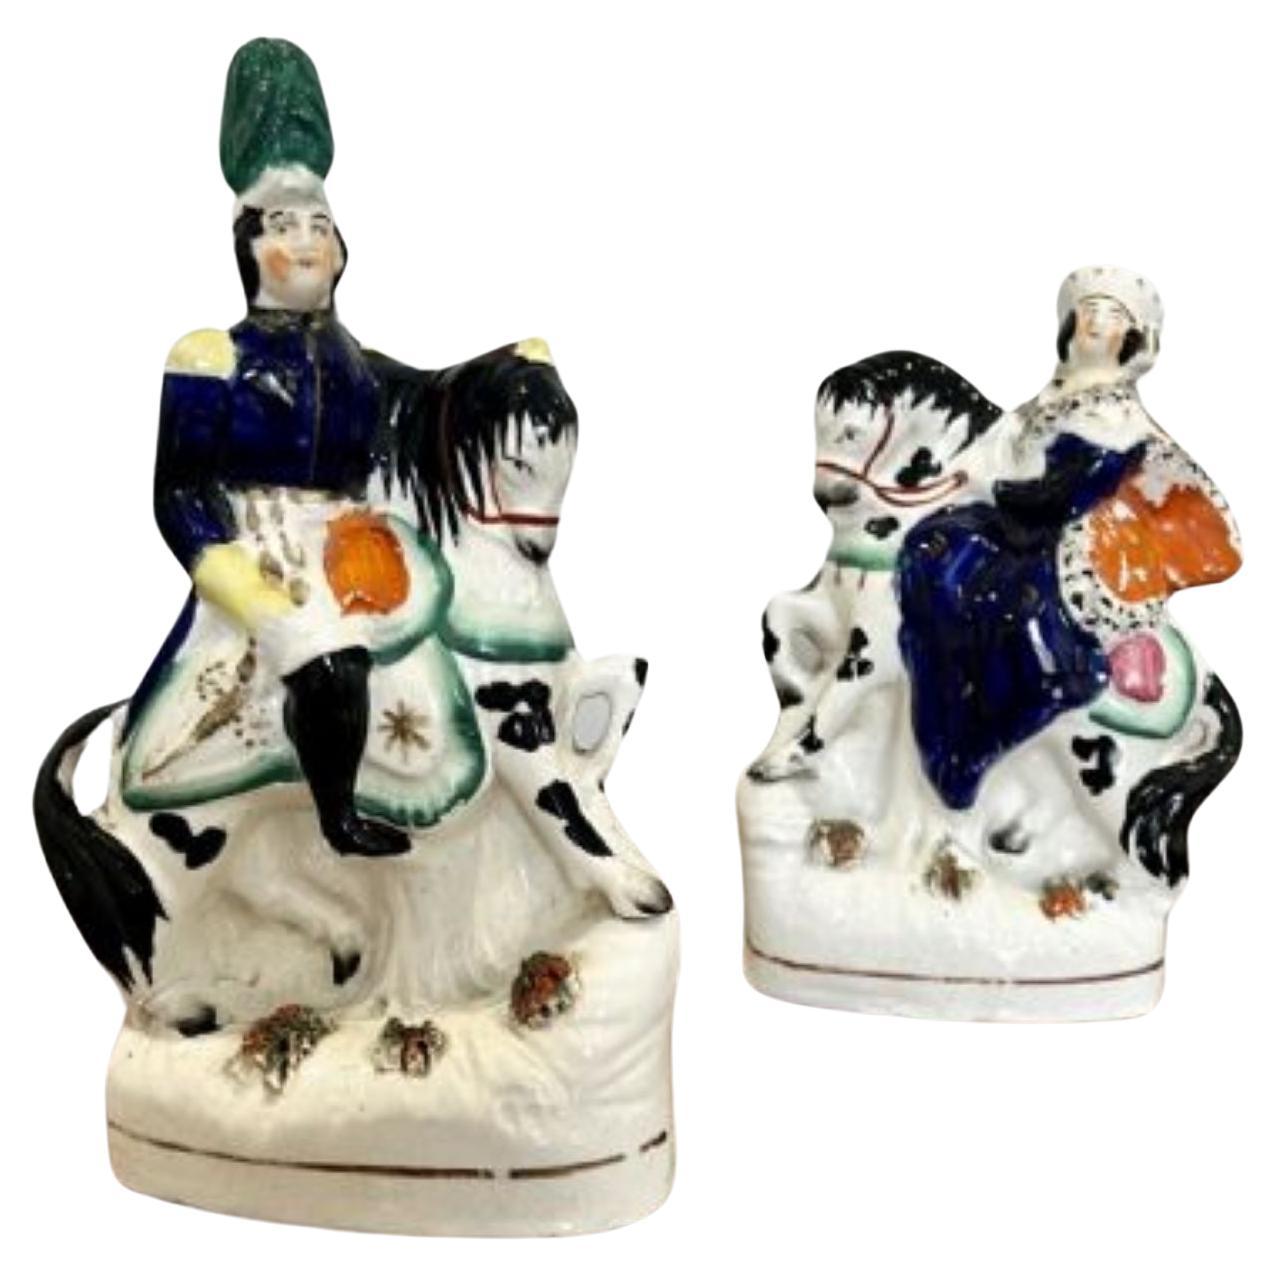 Quality pair of antique Victorian Staffordshire Royal figures  For Sale